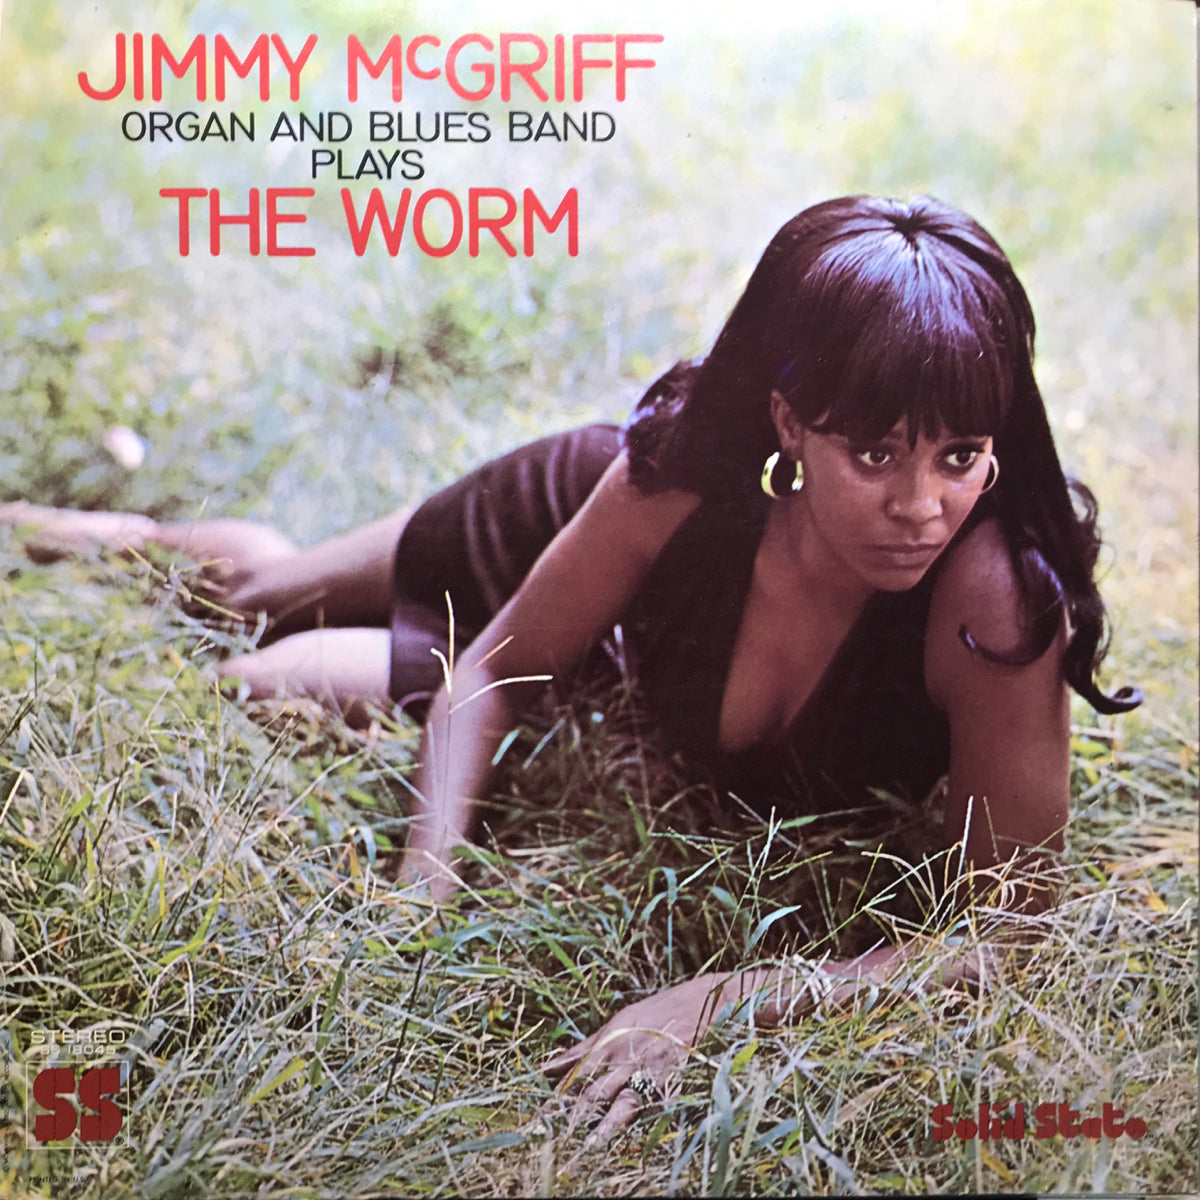 Jimmy McGriff Organ And Blues Band / The Worm | VINYL7 RECORDS